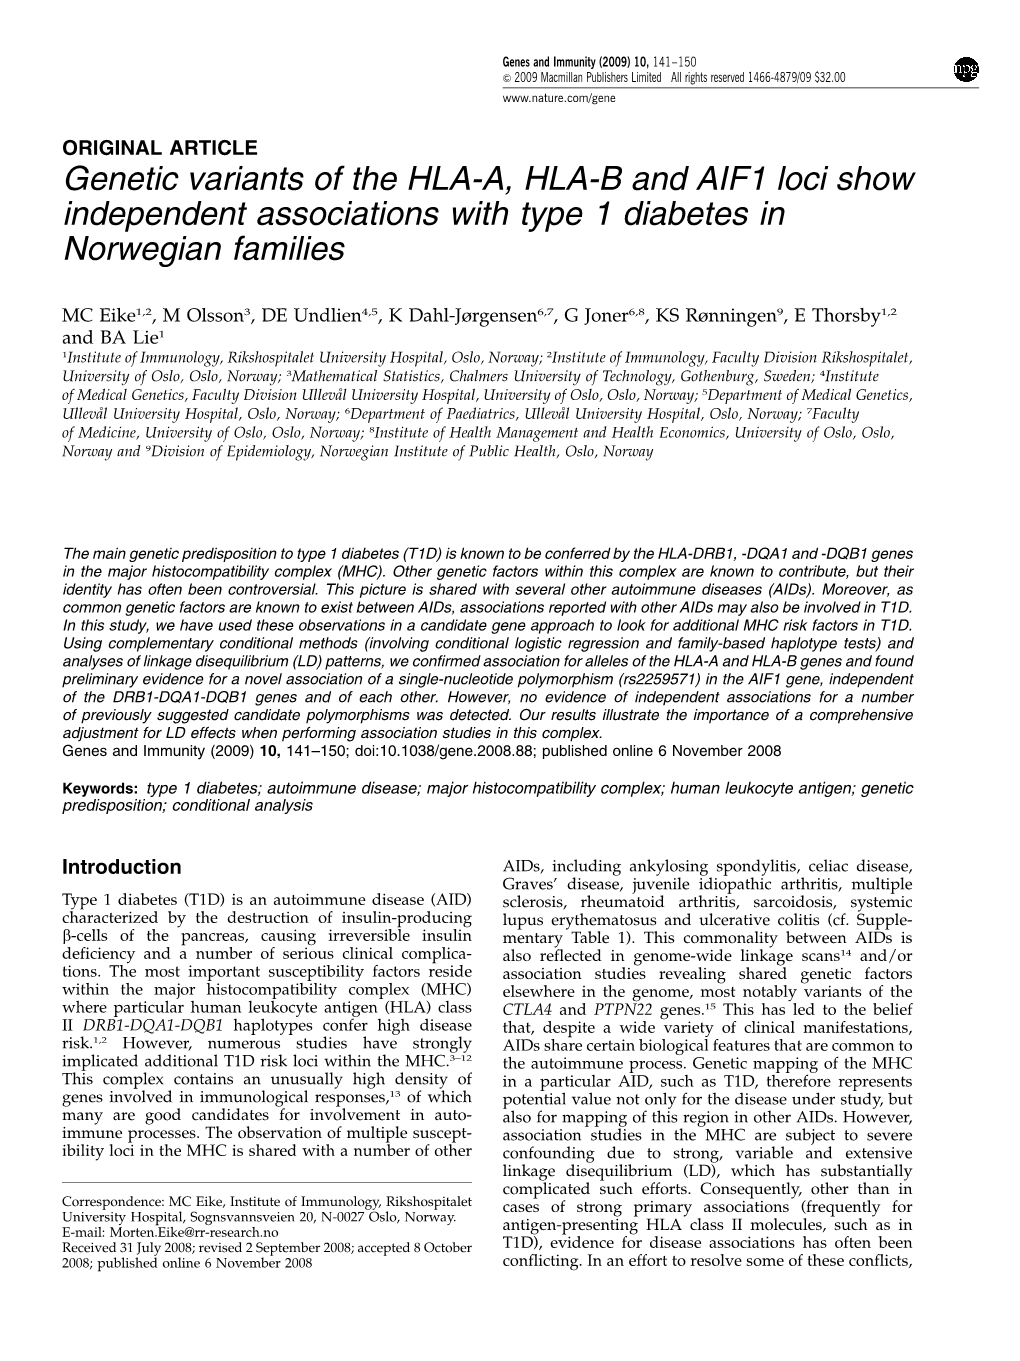 Genetic Variants of the HLA-A, HLA-B and AIF1 Loci Show Independent Associations with Type 1 Diabetes in Norwegian Families